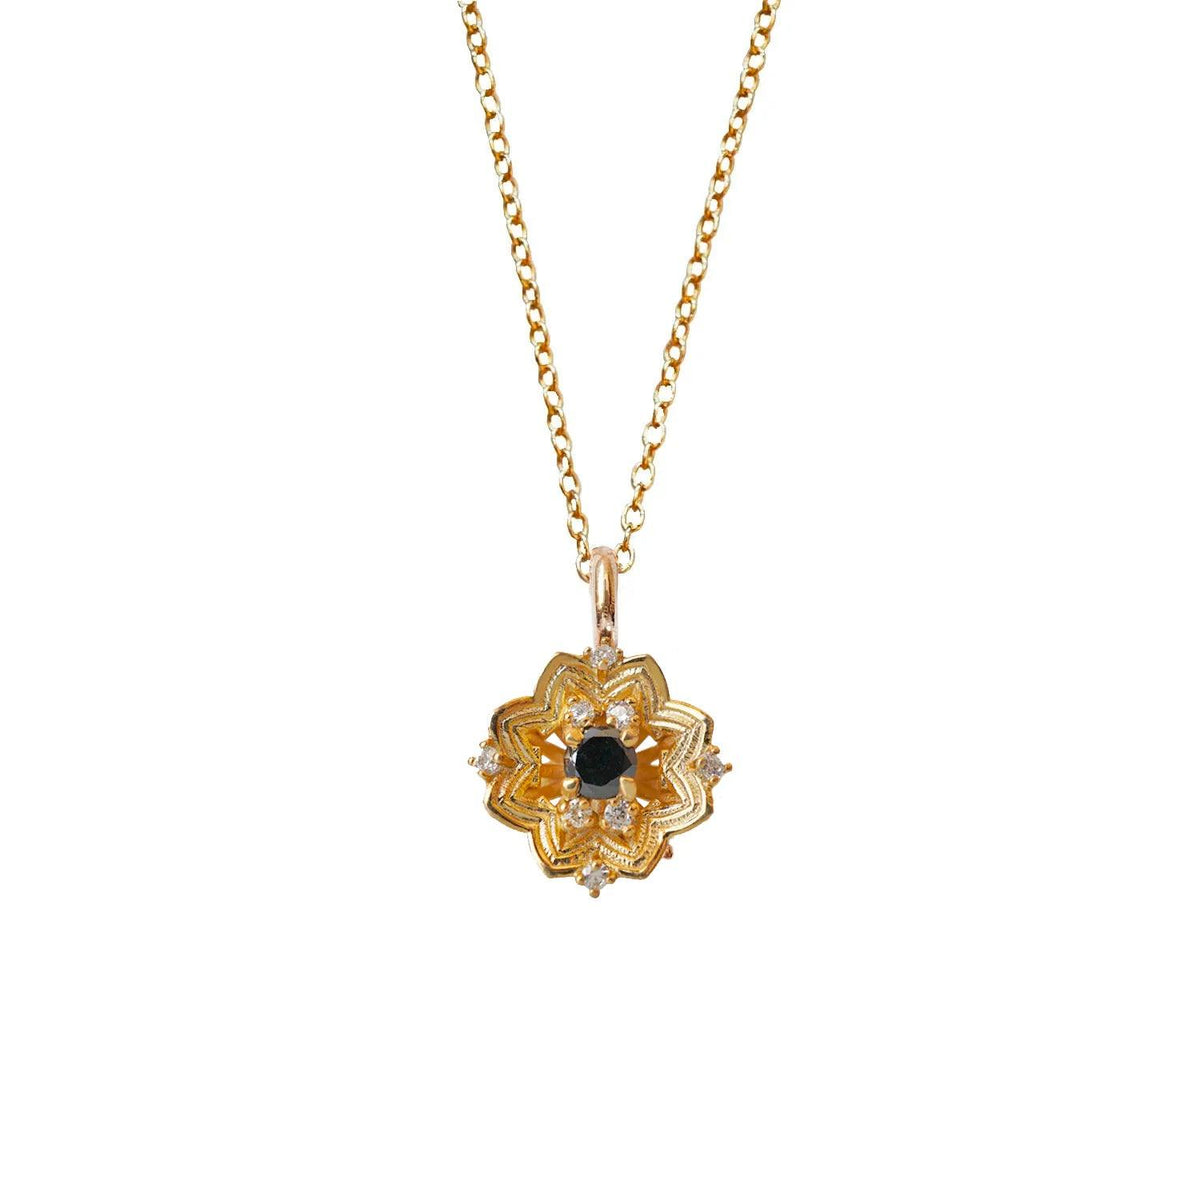 Delicate Lovers Gold-Filled Chain – Tippy Taste Jewelry